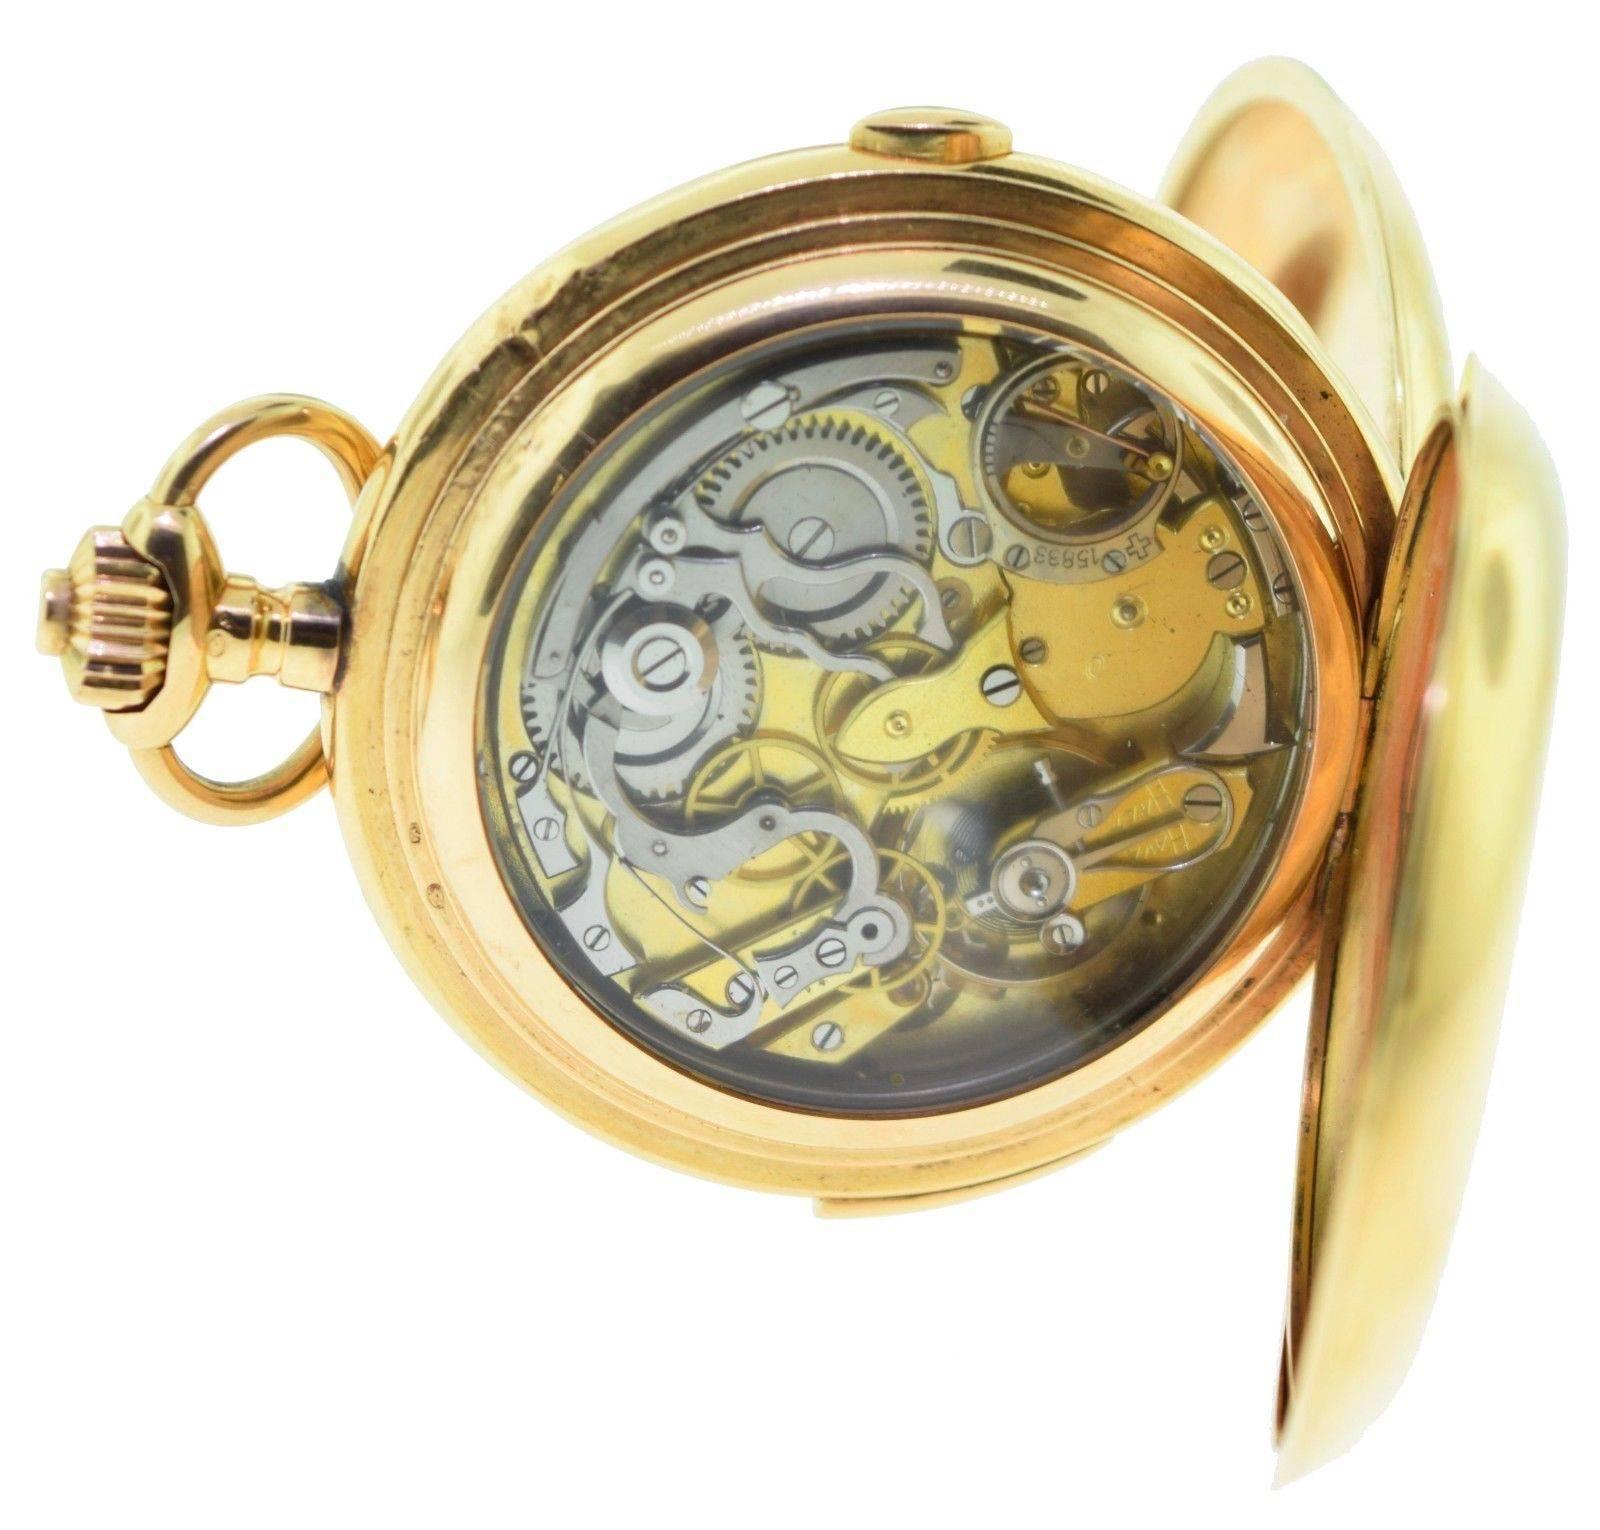 Vintage Swiss 18k Yellow Gold Quarter Repeater Pocket Watch For Sale 1